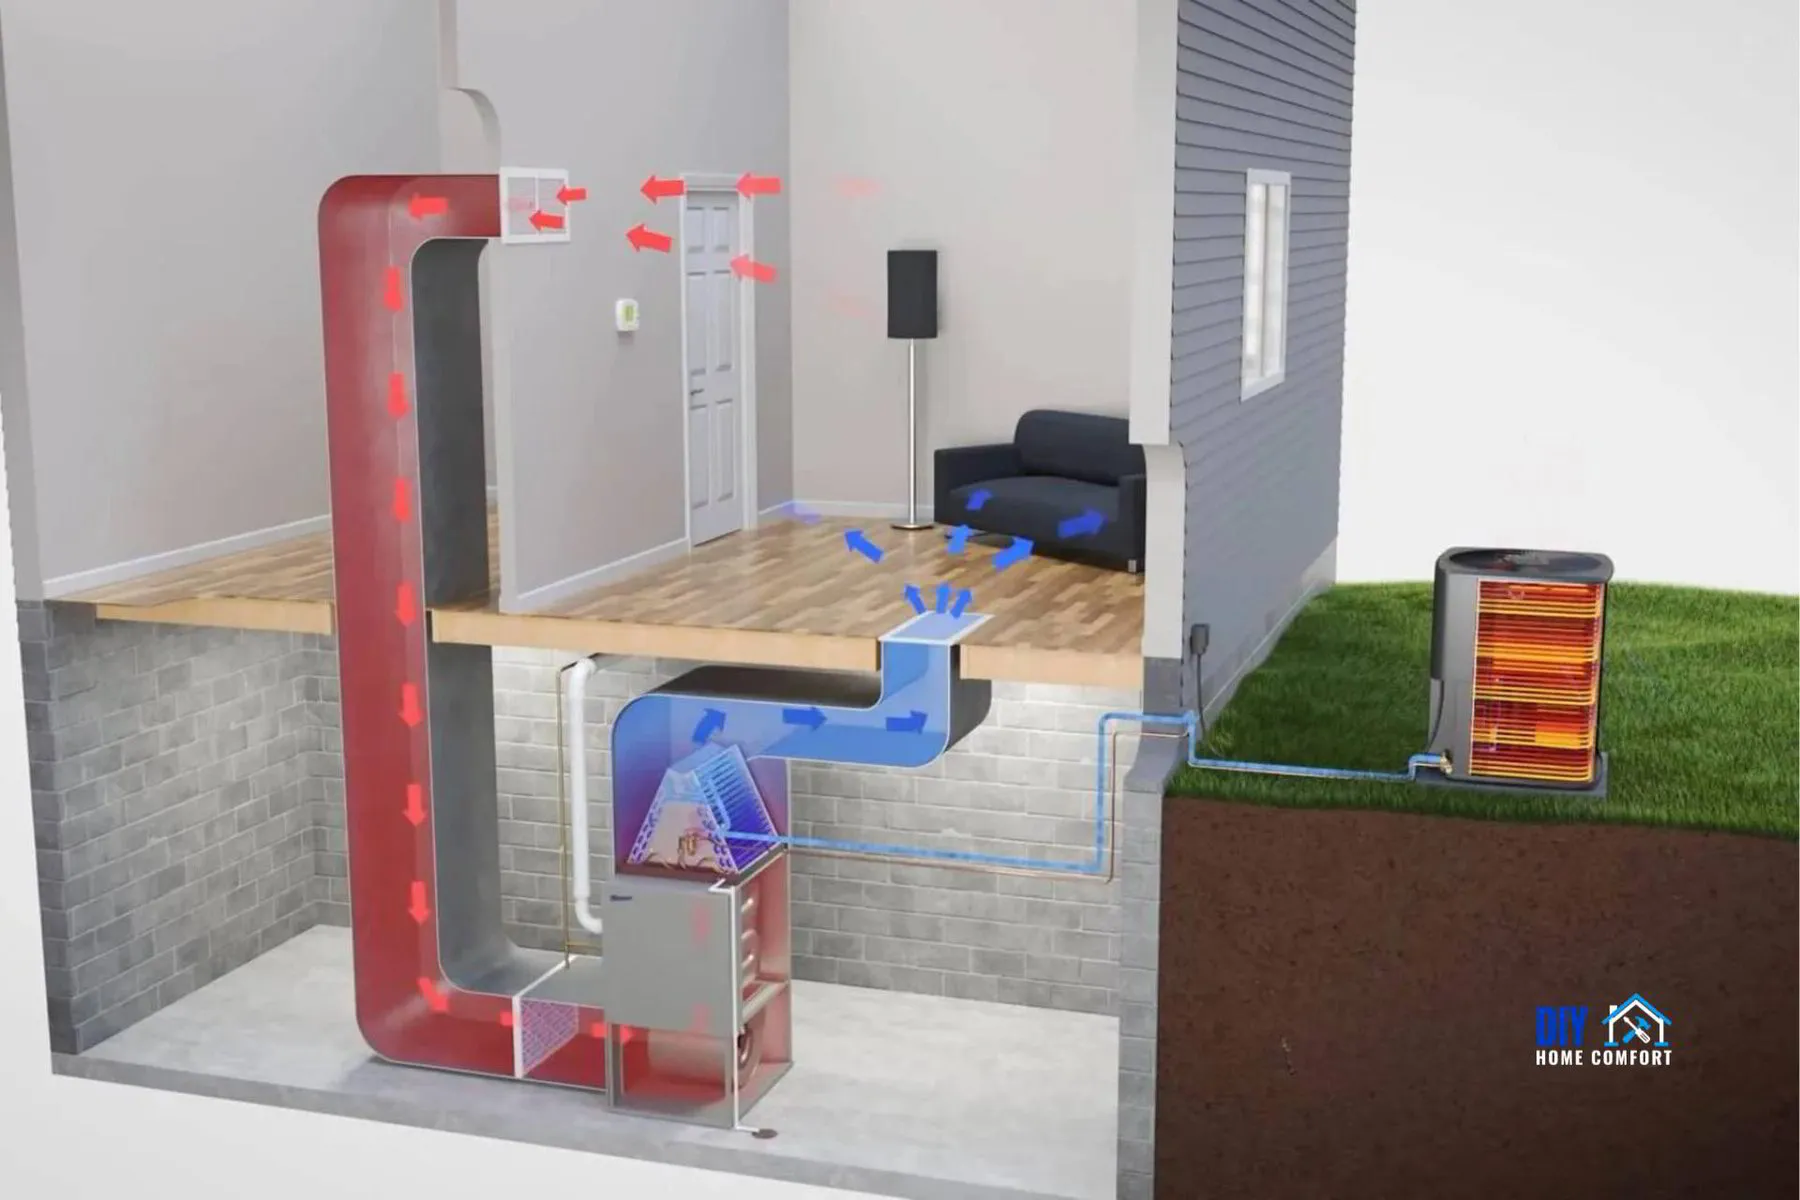 residential ac and heat pump system layout